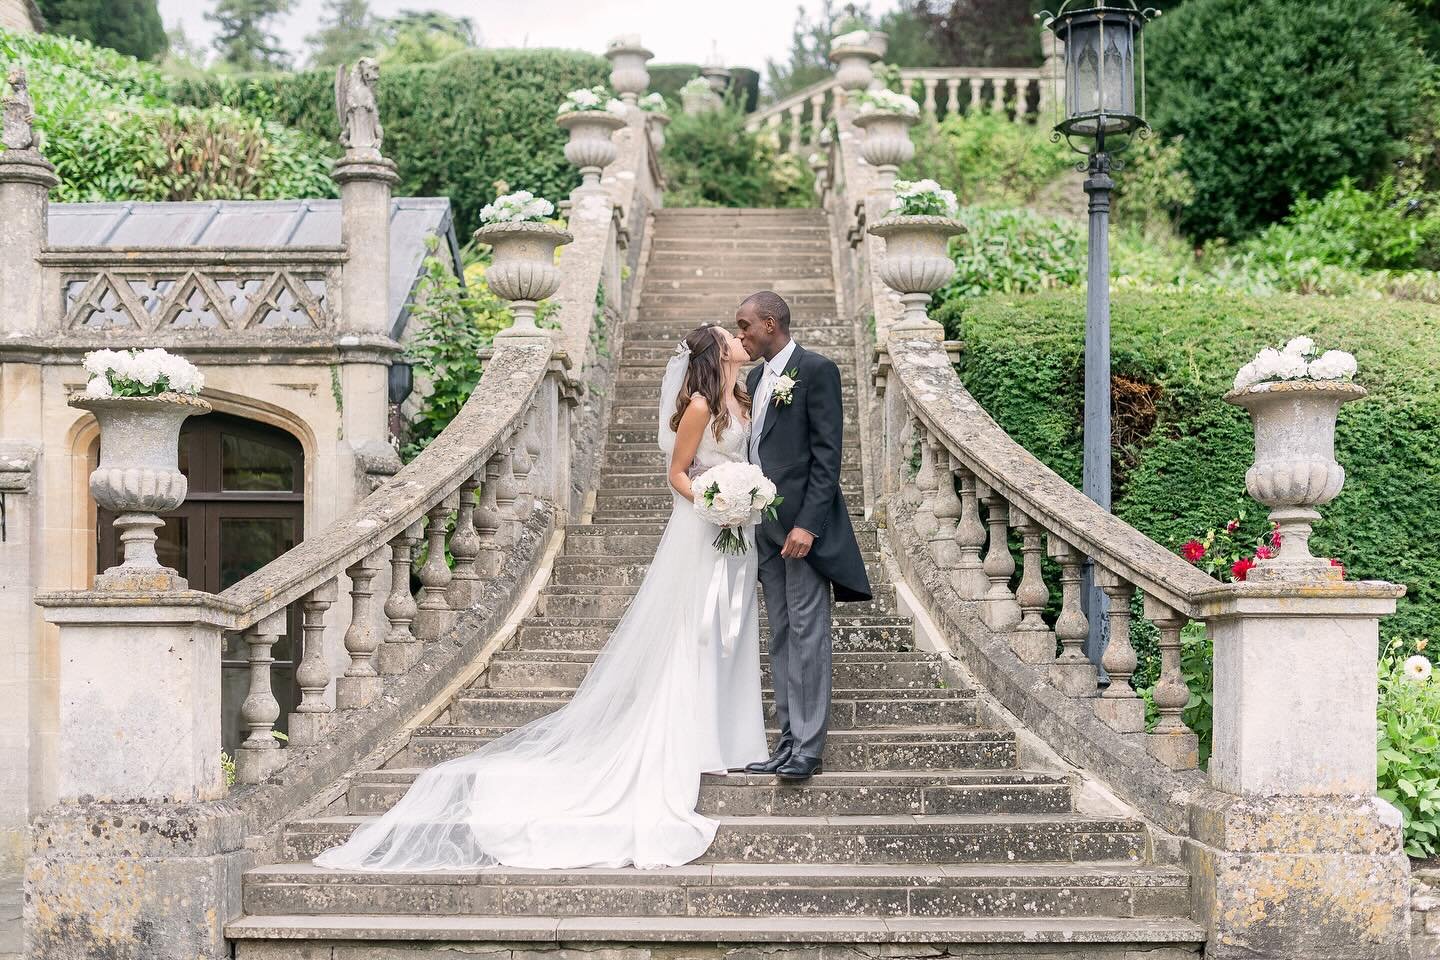 MANOR HOUSE WEDDINGS
Nestled in the picturesque village of Castle Combe in Wiltshire, this 14th-century five star hotel &amp; Michelin starred restaurant is the most beautiful cotswold wedding venue. 
We have planned many beautiful weddings &amp; we 